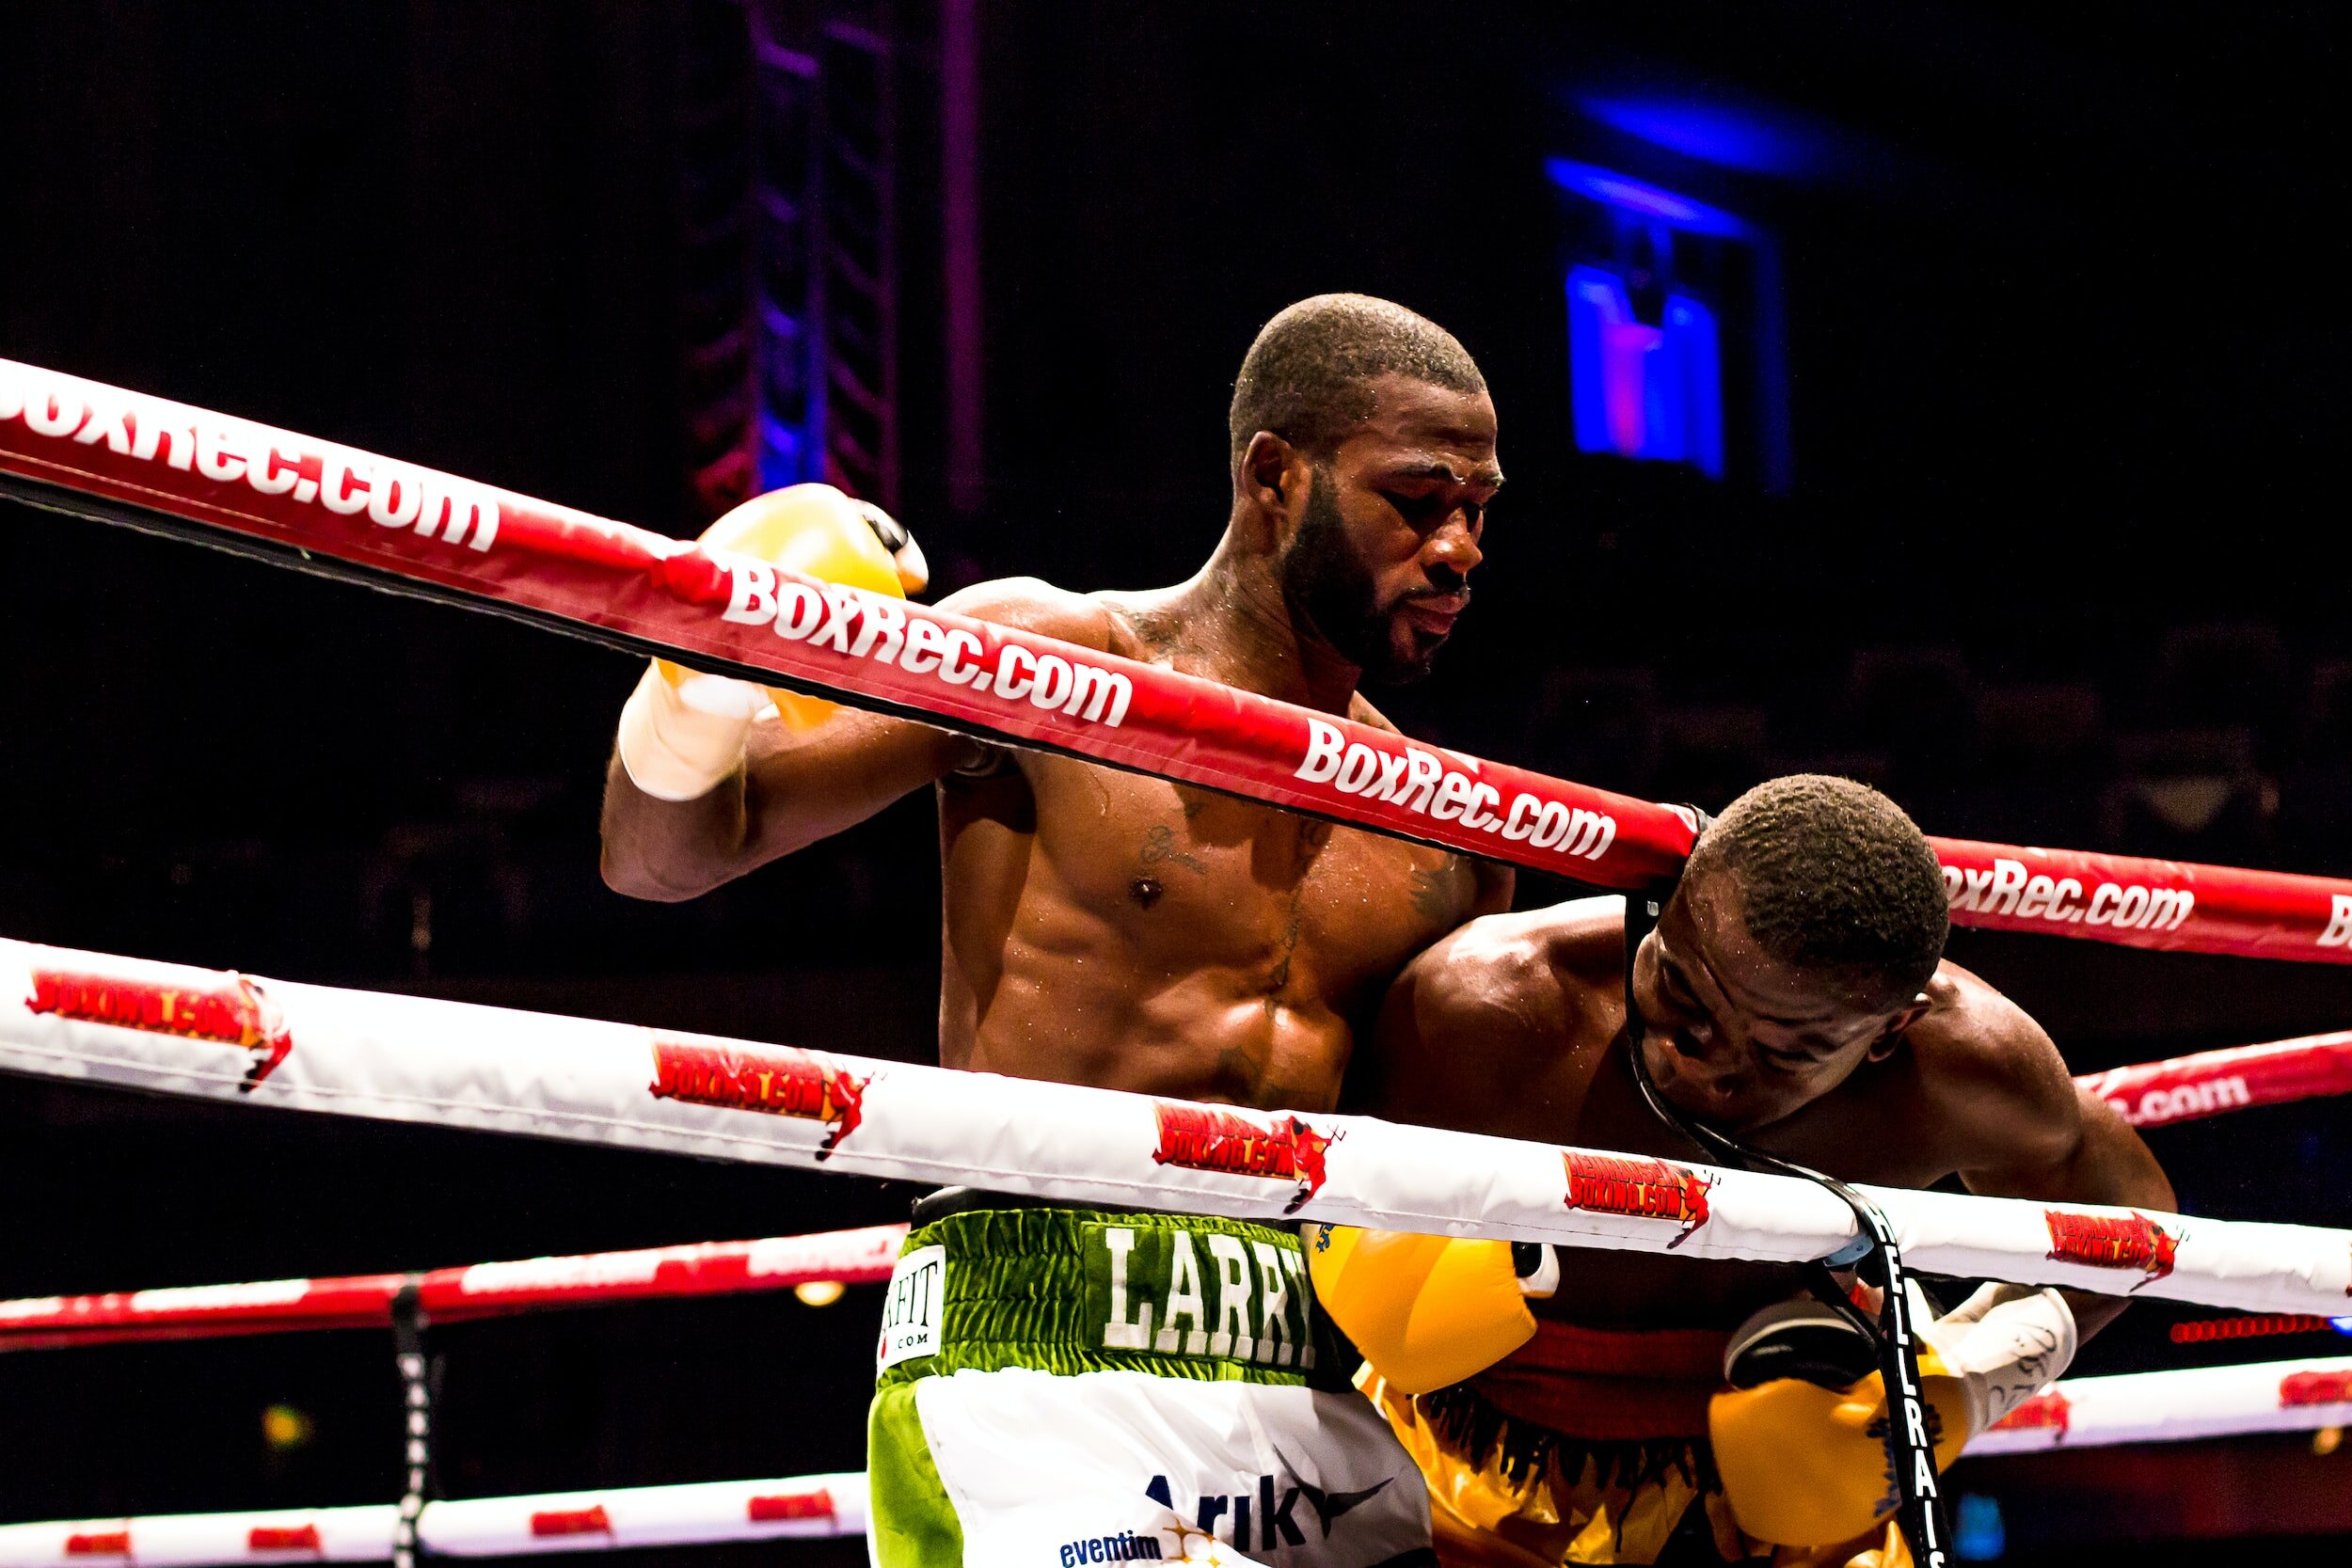 Two men engaged in a boxing match, one with his head between the ropes.